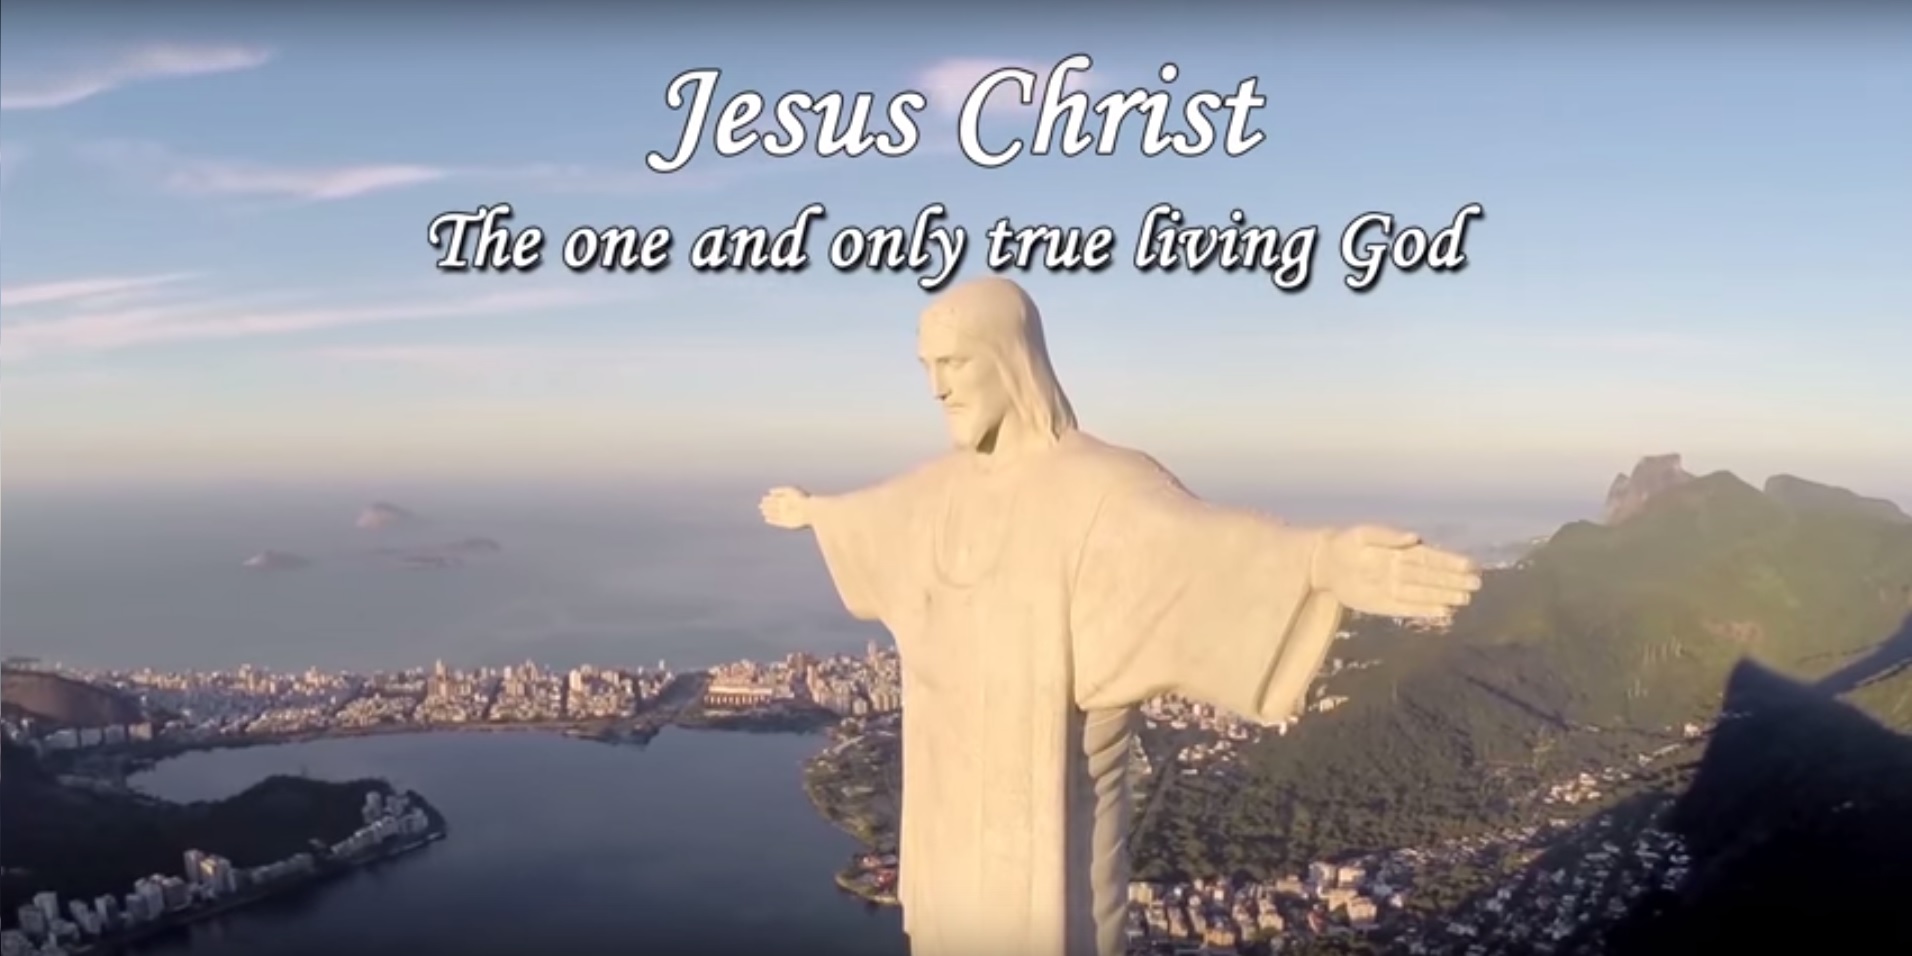 Jesus Christ - The one and only true living God